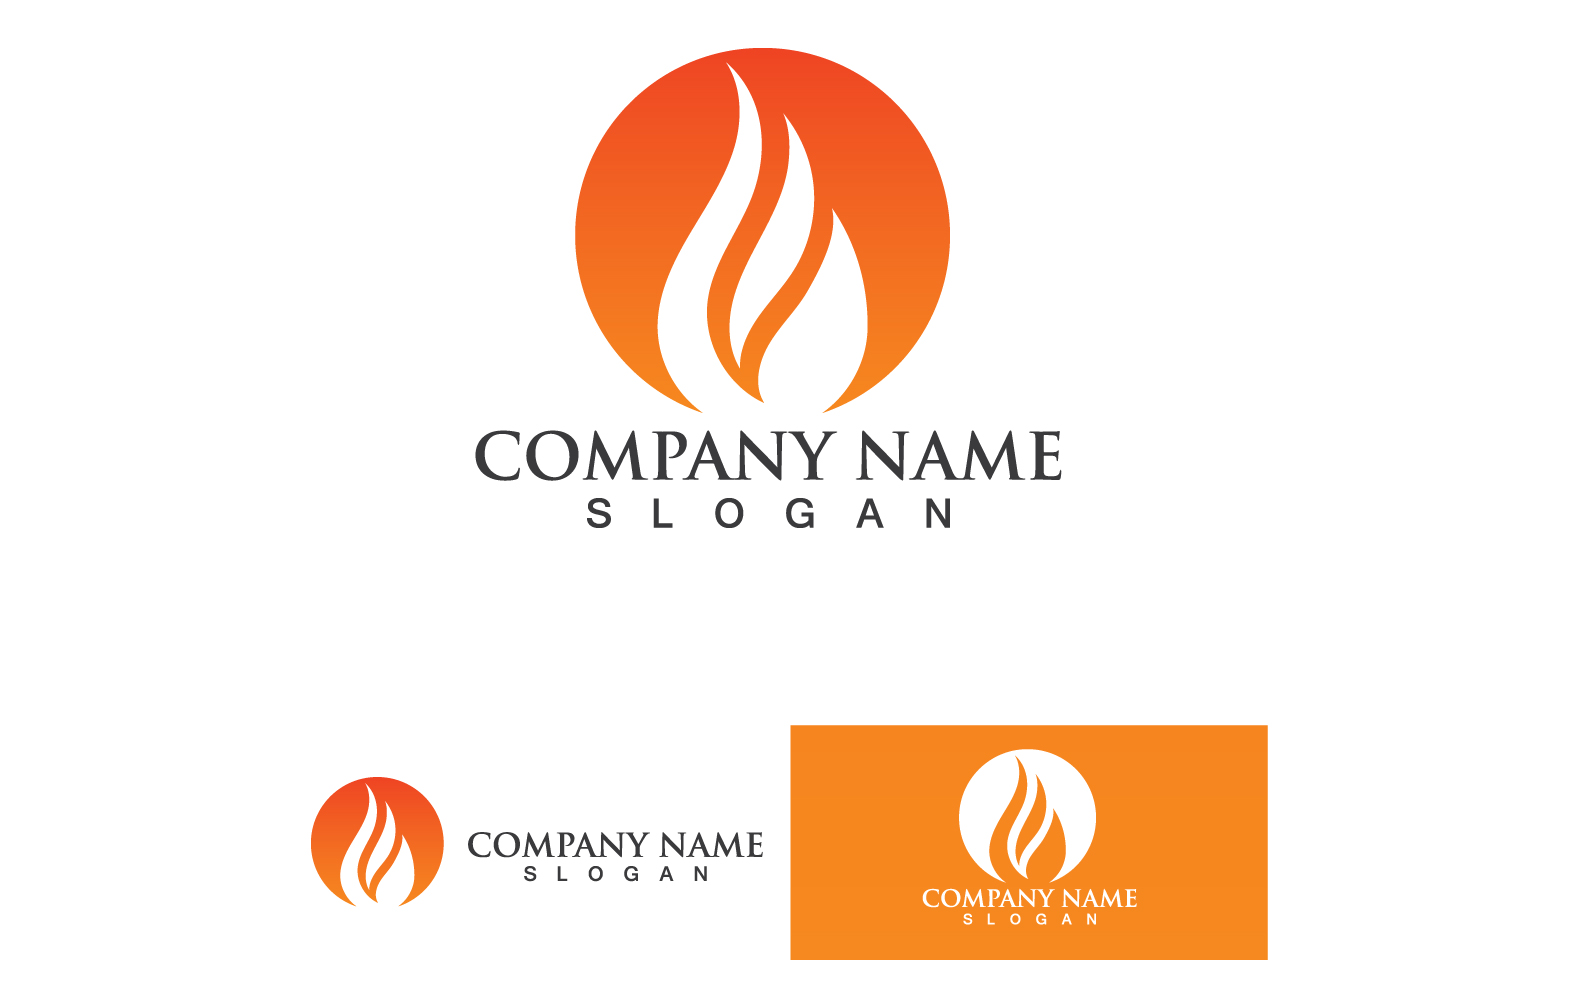 Wing Bird Business Logo Your Company Name V39